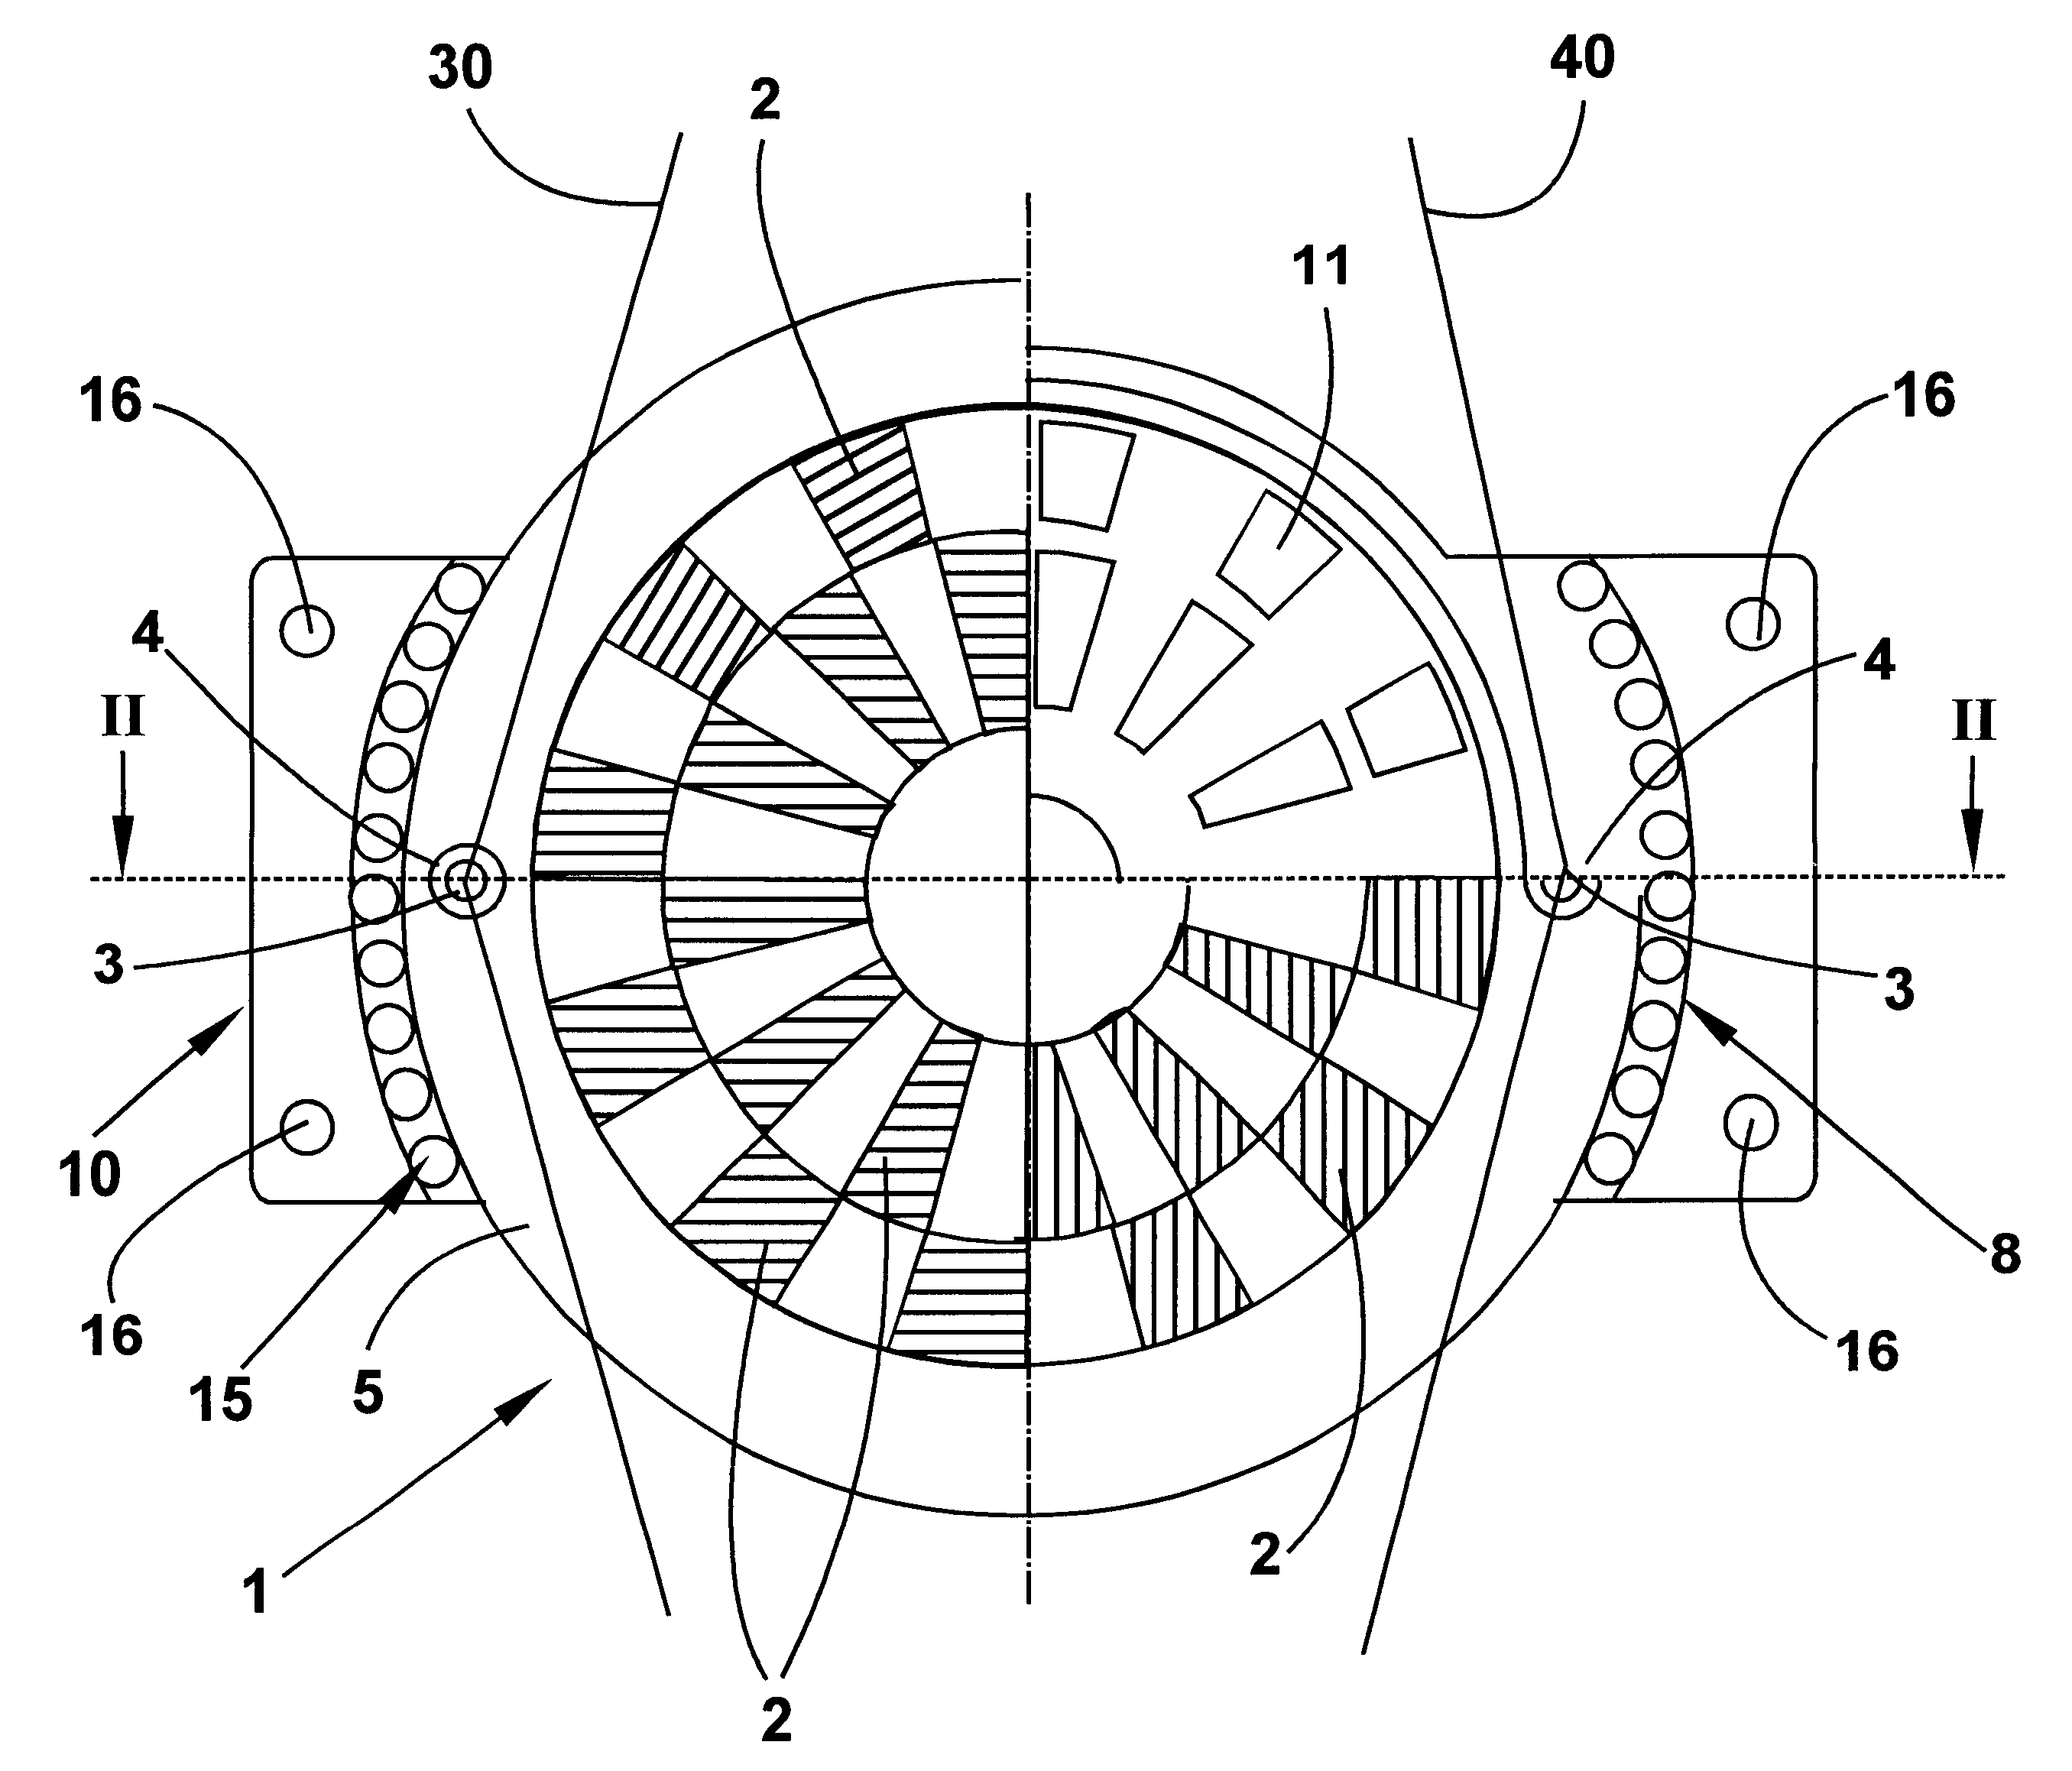 Device for forming a leno selvedge with an electric motor comprising a rotor and a stator accomodating the rotor